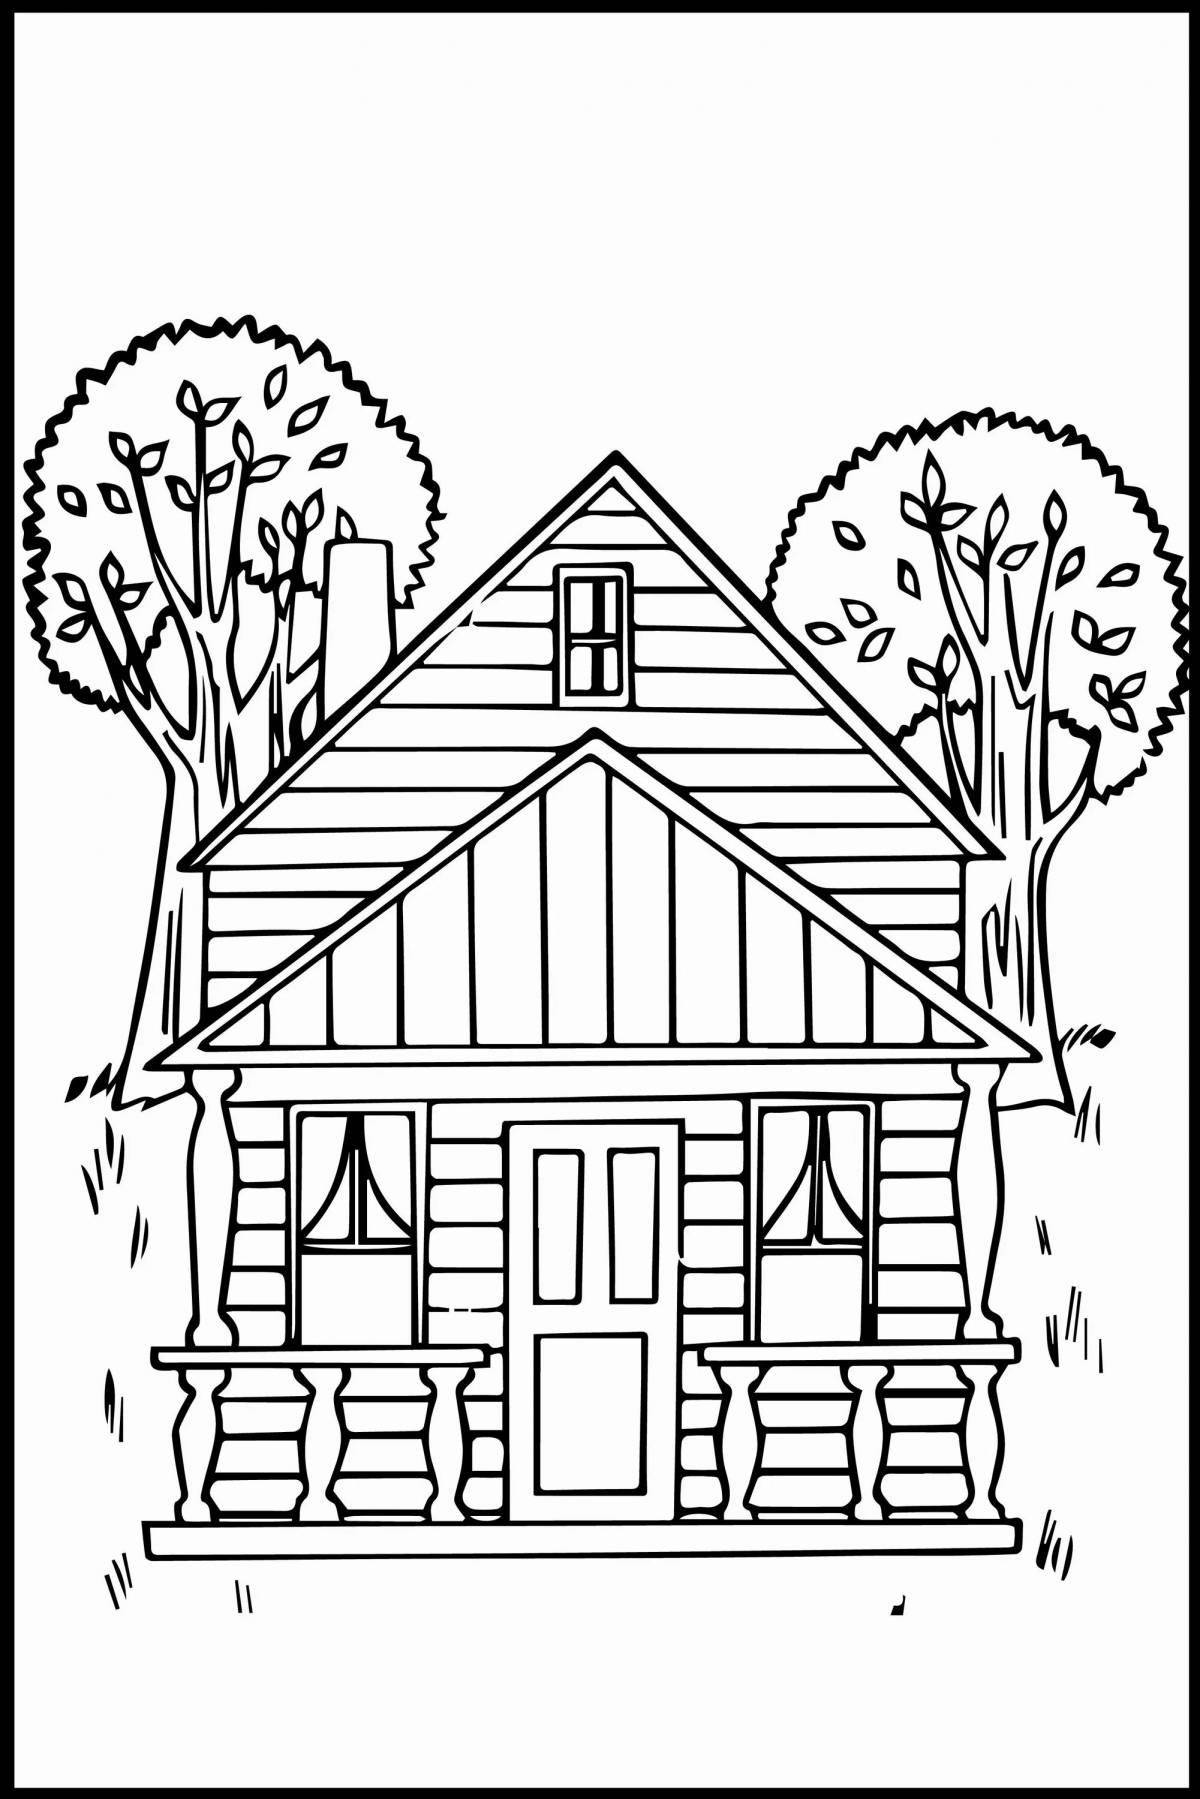 Wonderful house coloring book